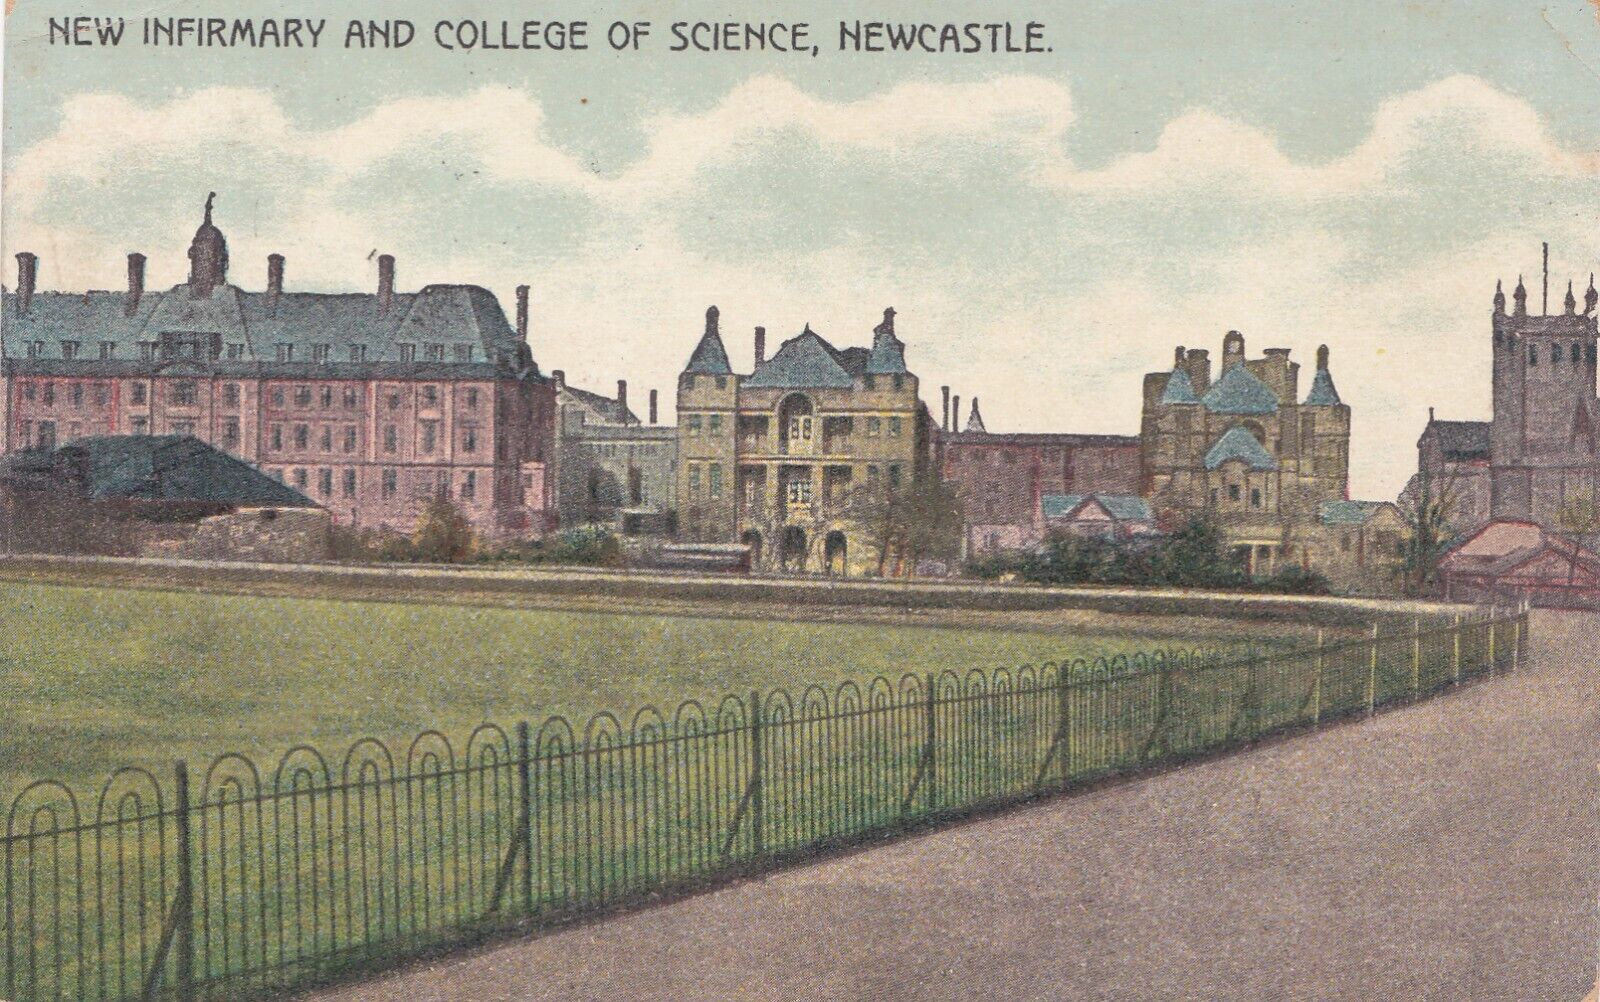 House Clearance - Newcastle New Infirmary & College of Science - Service 1908